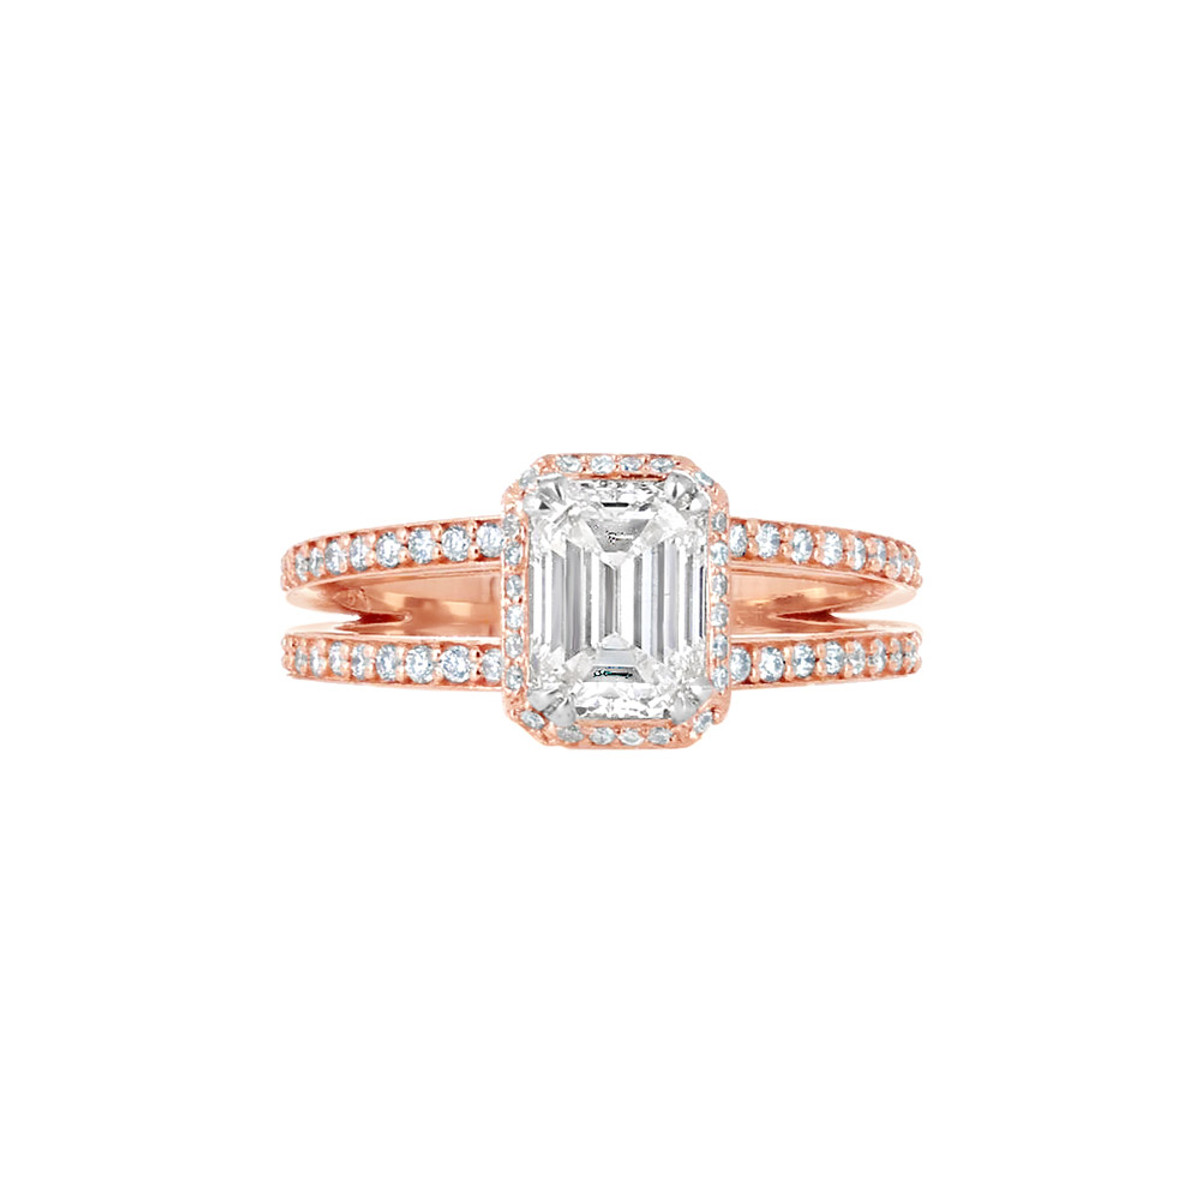 Engage By Hyde Park 18KT Rose Gold & 1.2 CT GIA Diamond Double Band Pave Engagement Ring-DCCT2324 Product Image